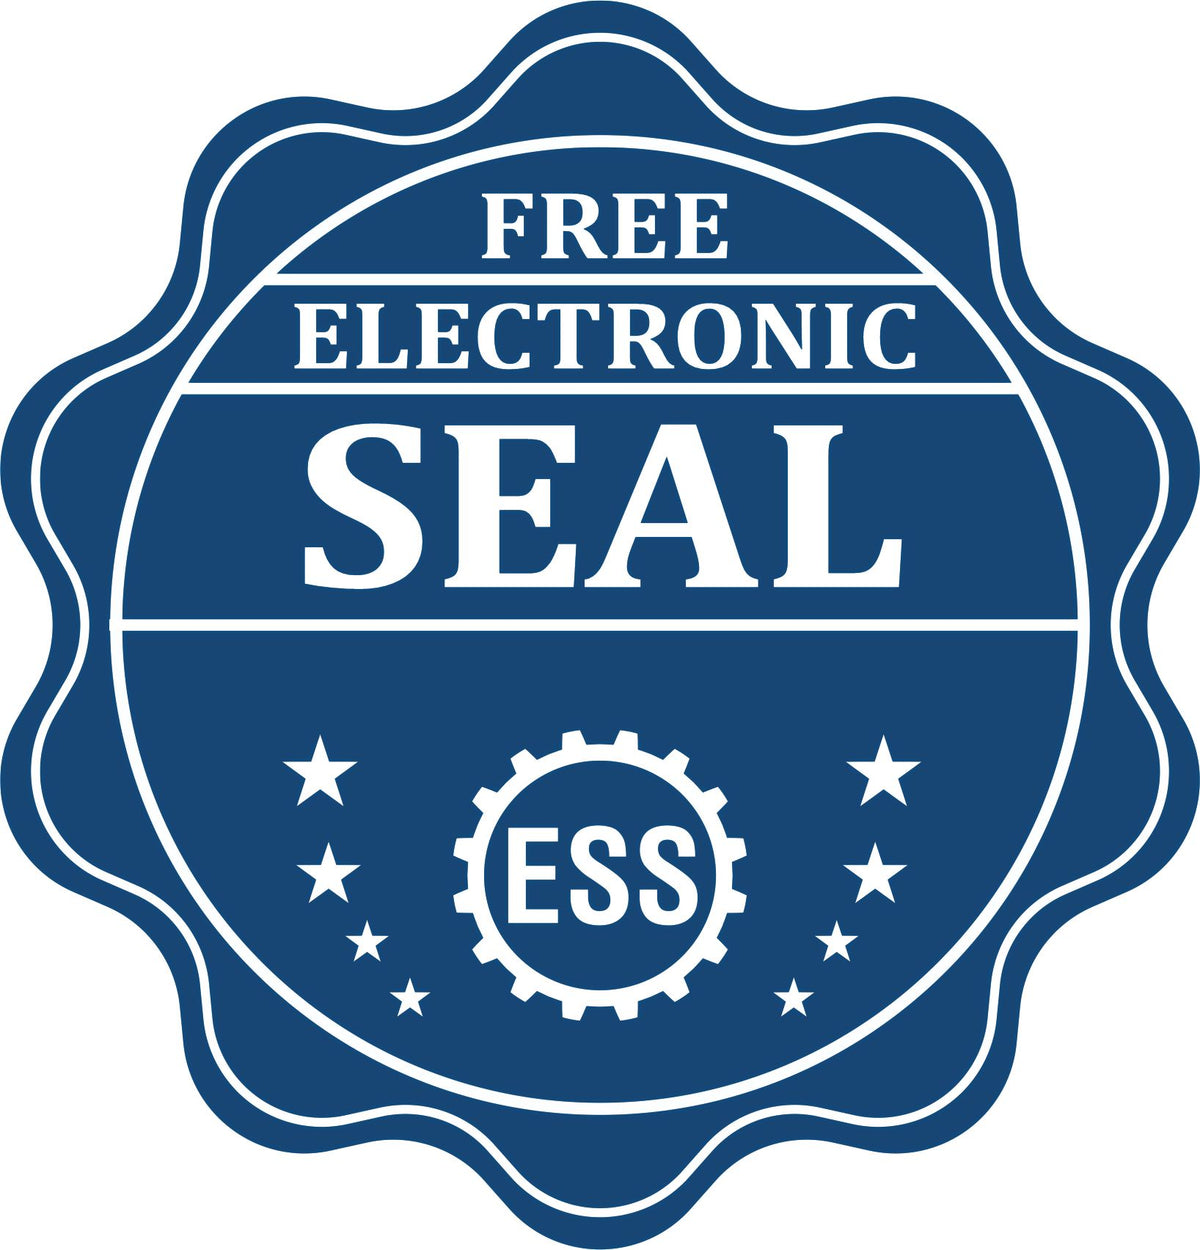 A badge showing a free electronic seal for the Handheld Hawaii Land Surveyor Seal with stars and the ESS gear on the emblem.